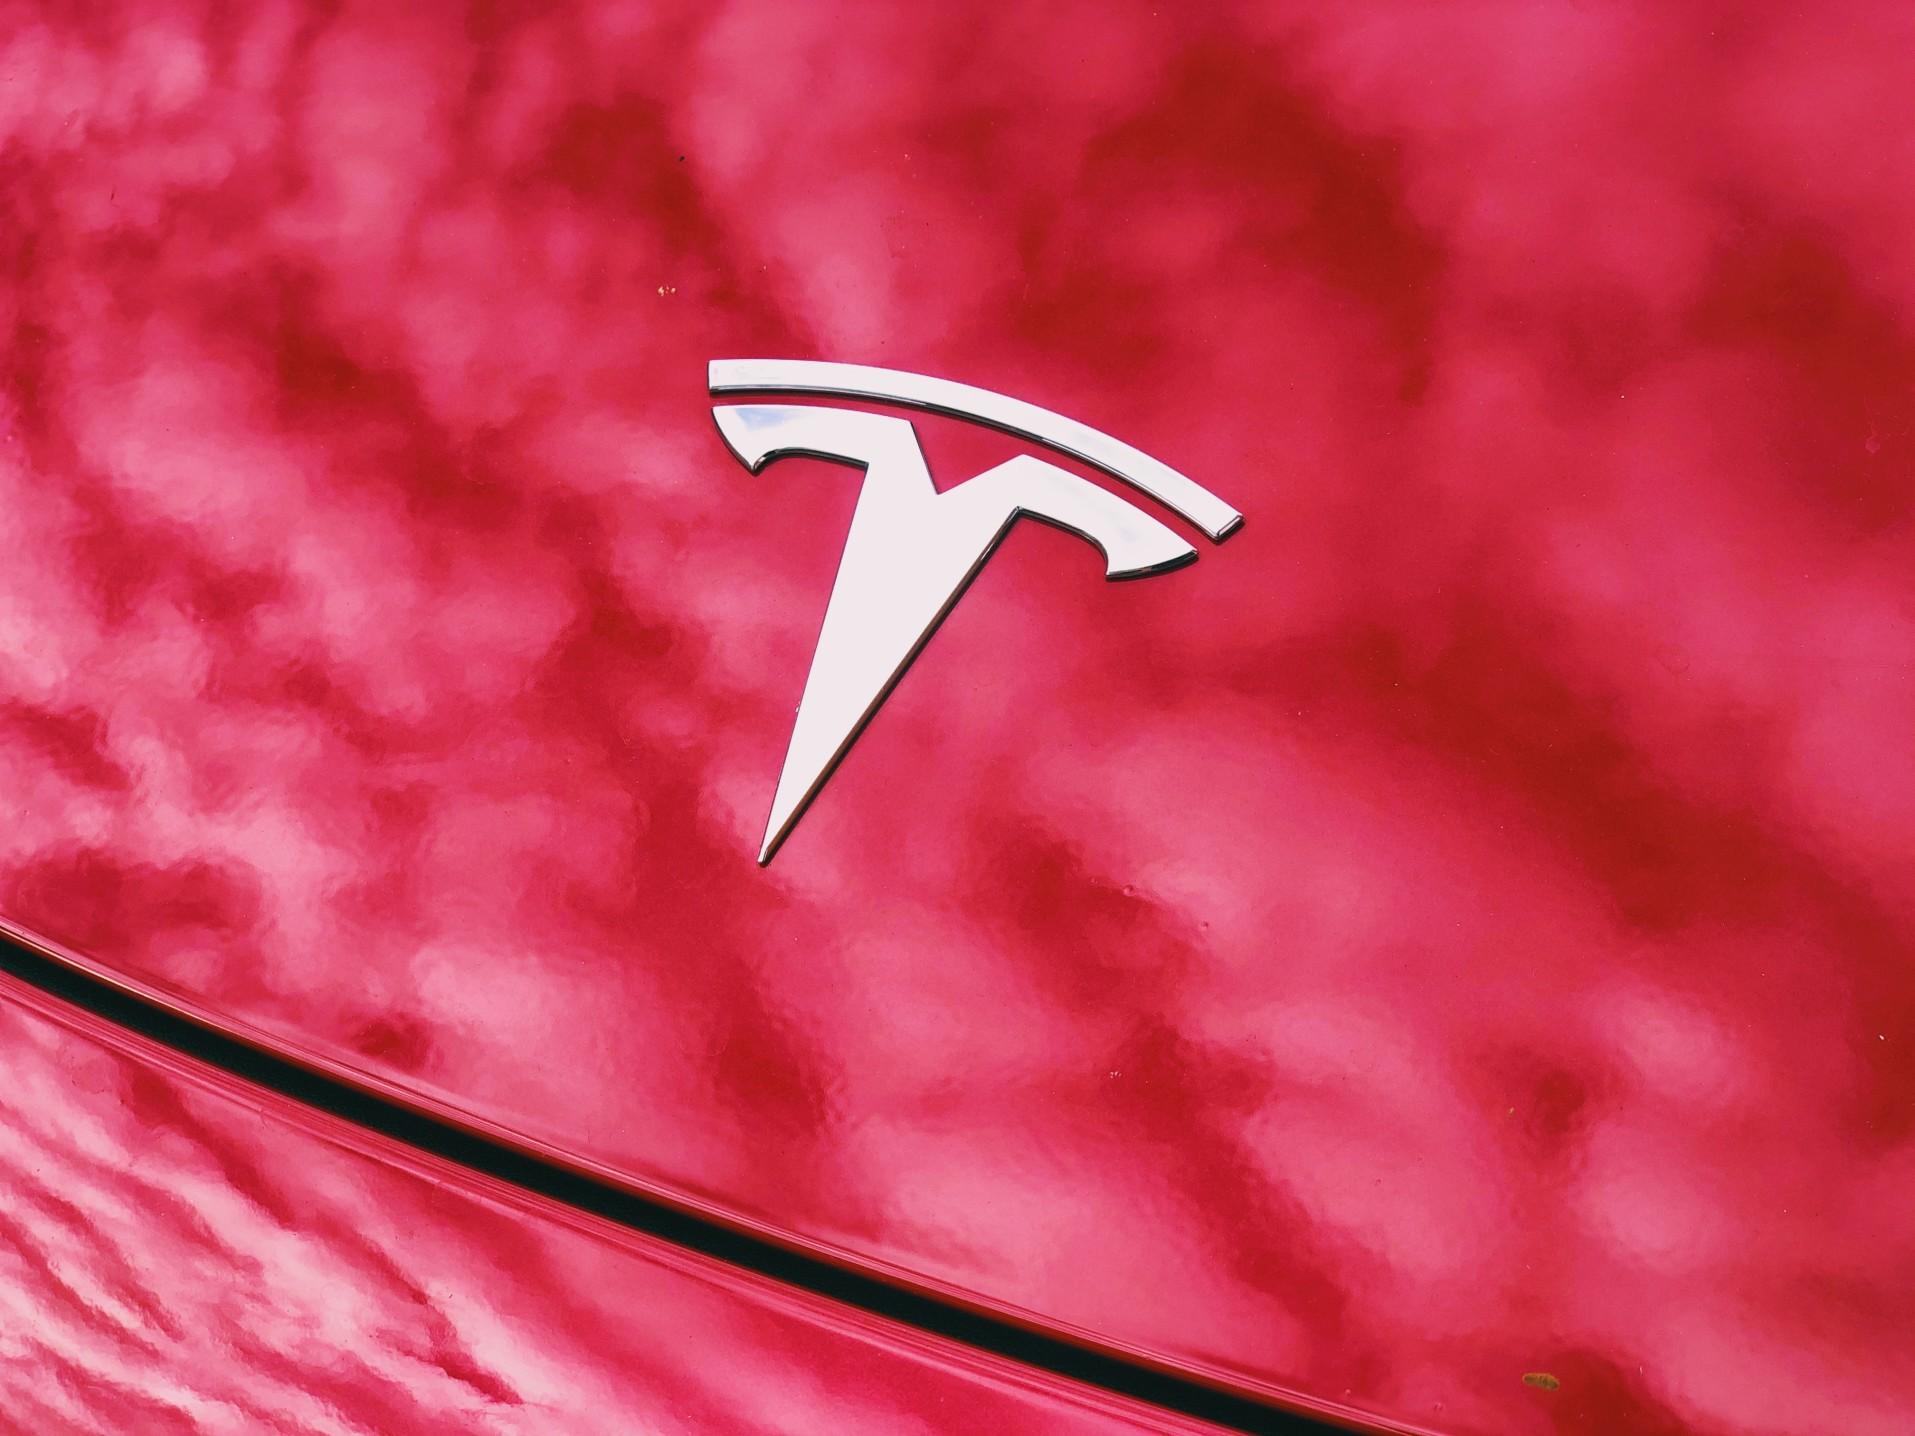 Tesla is known for its high-tech cars and a focus on software.